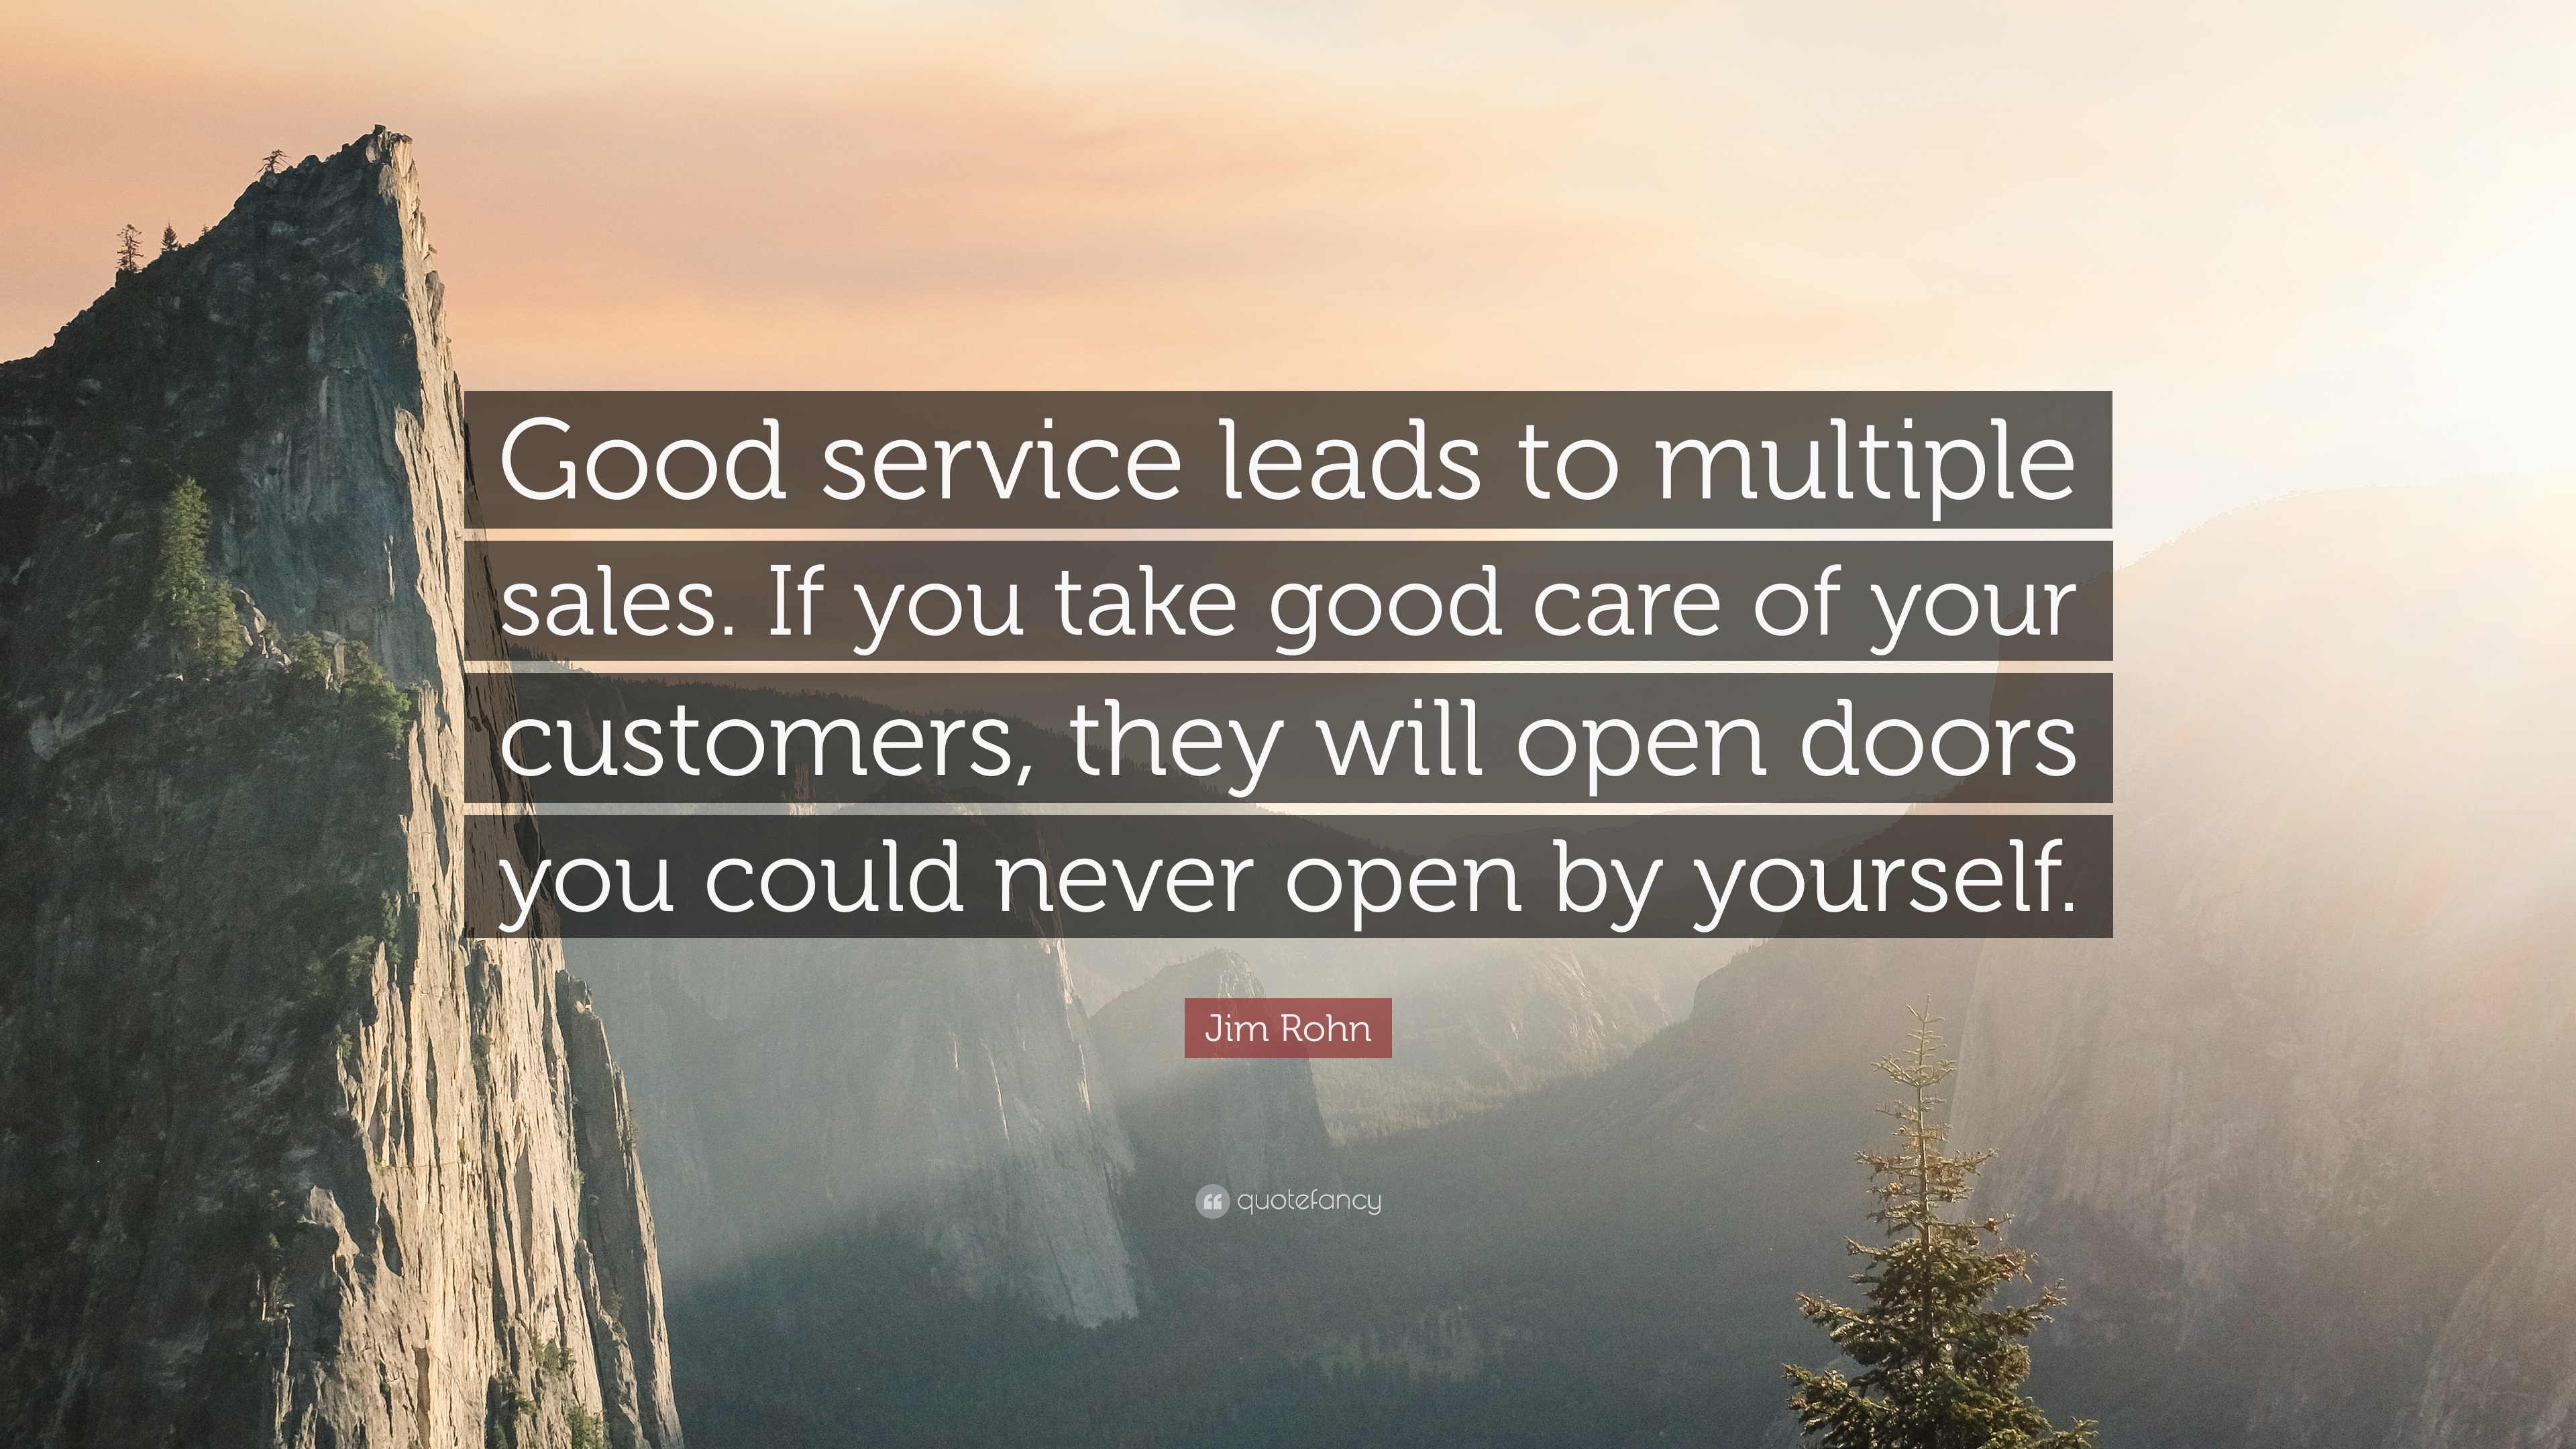 https://quotefancy.com/media/wallpaper/3840x2160/2033645-Jim-Rohn-Quote-Good-service-leads-to-multiple-sales-If-you-take.jpg